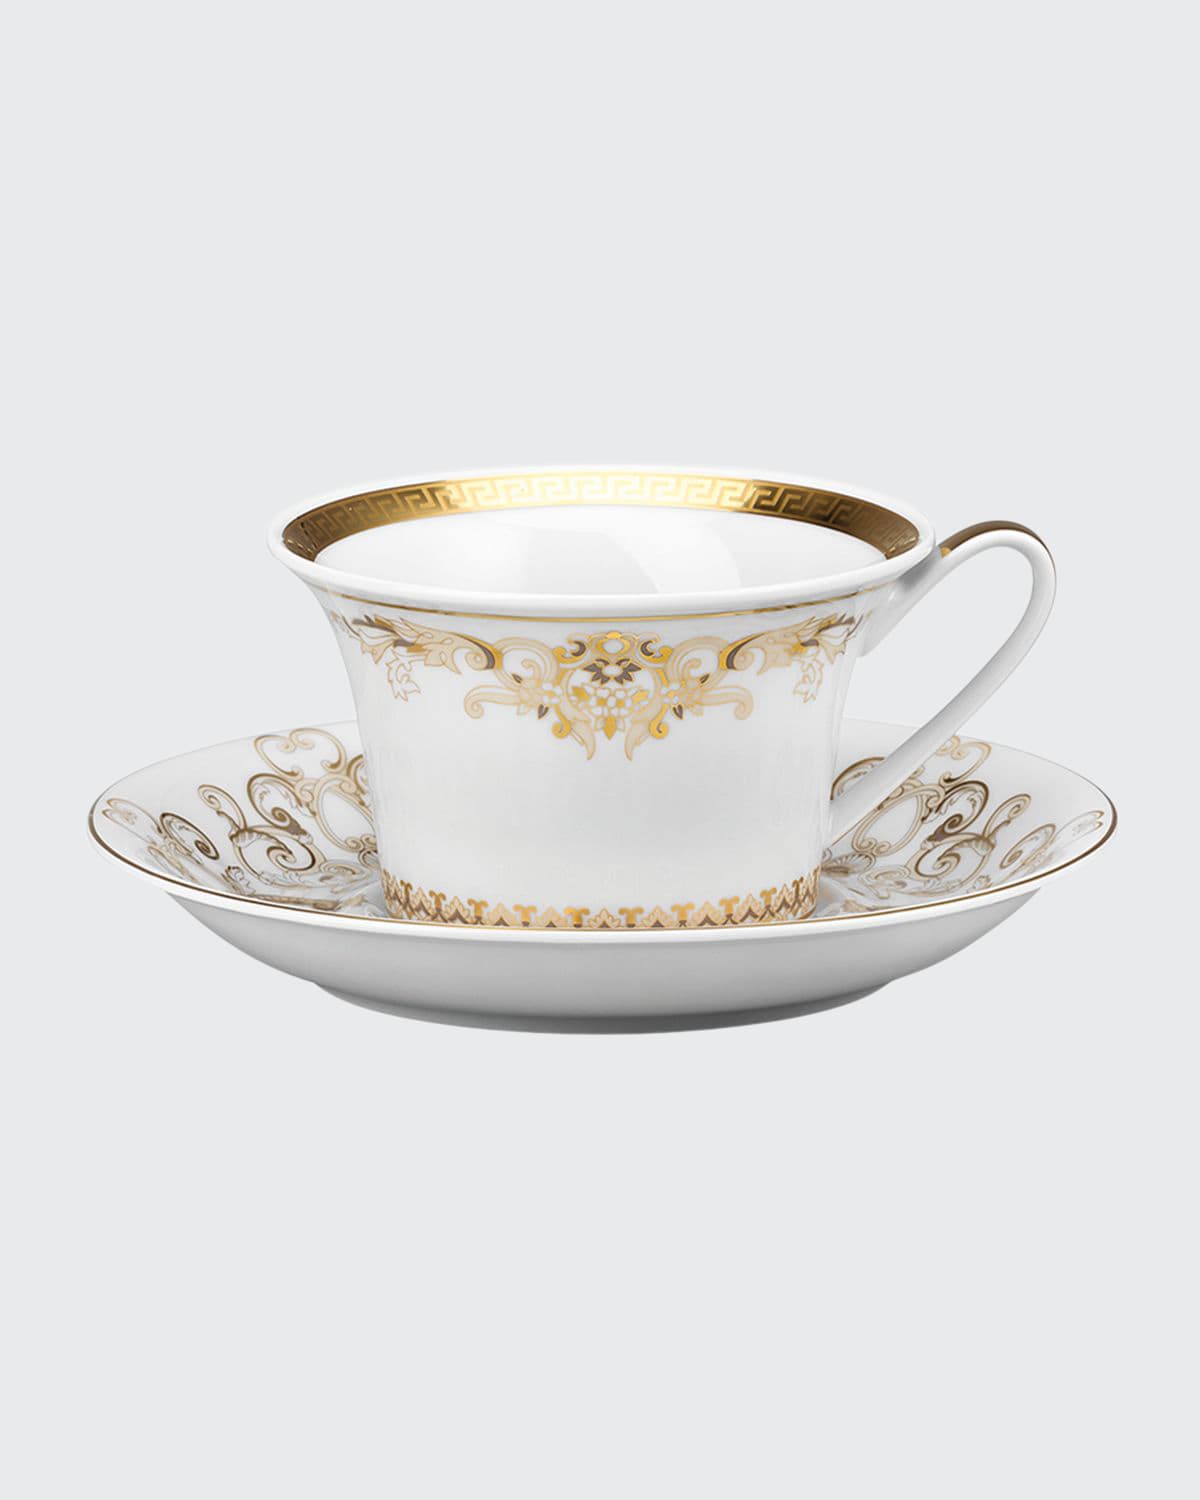 Versace Medusa Gala Gold Tea Cup & Saucer In White And Gold